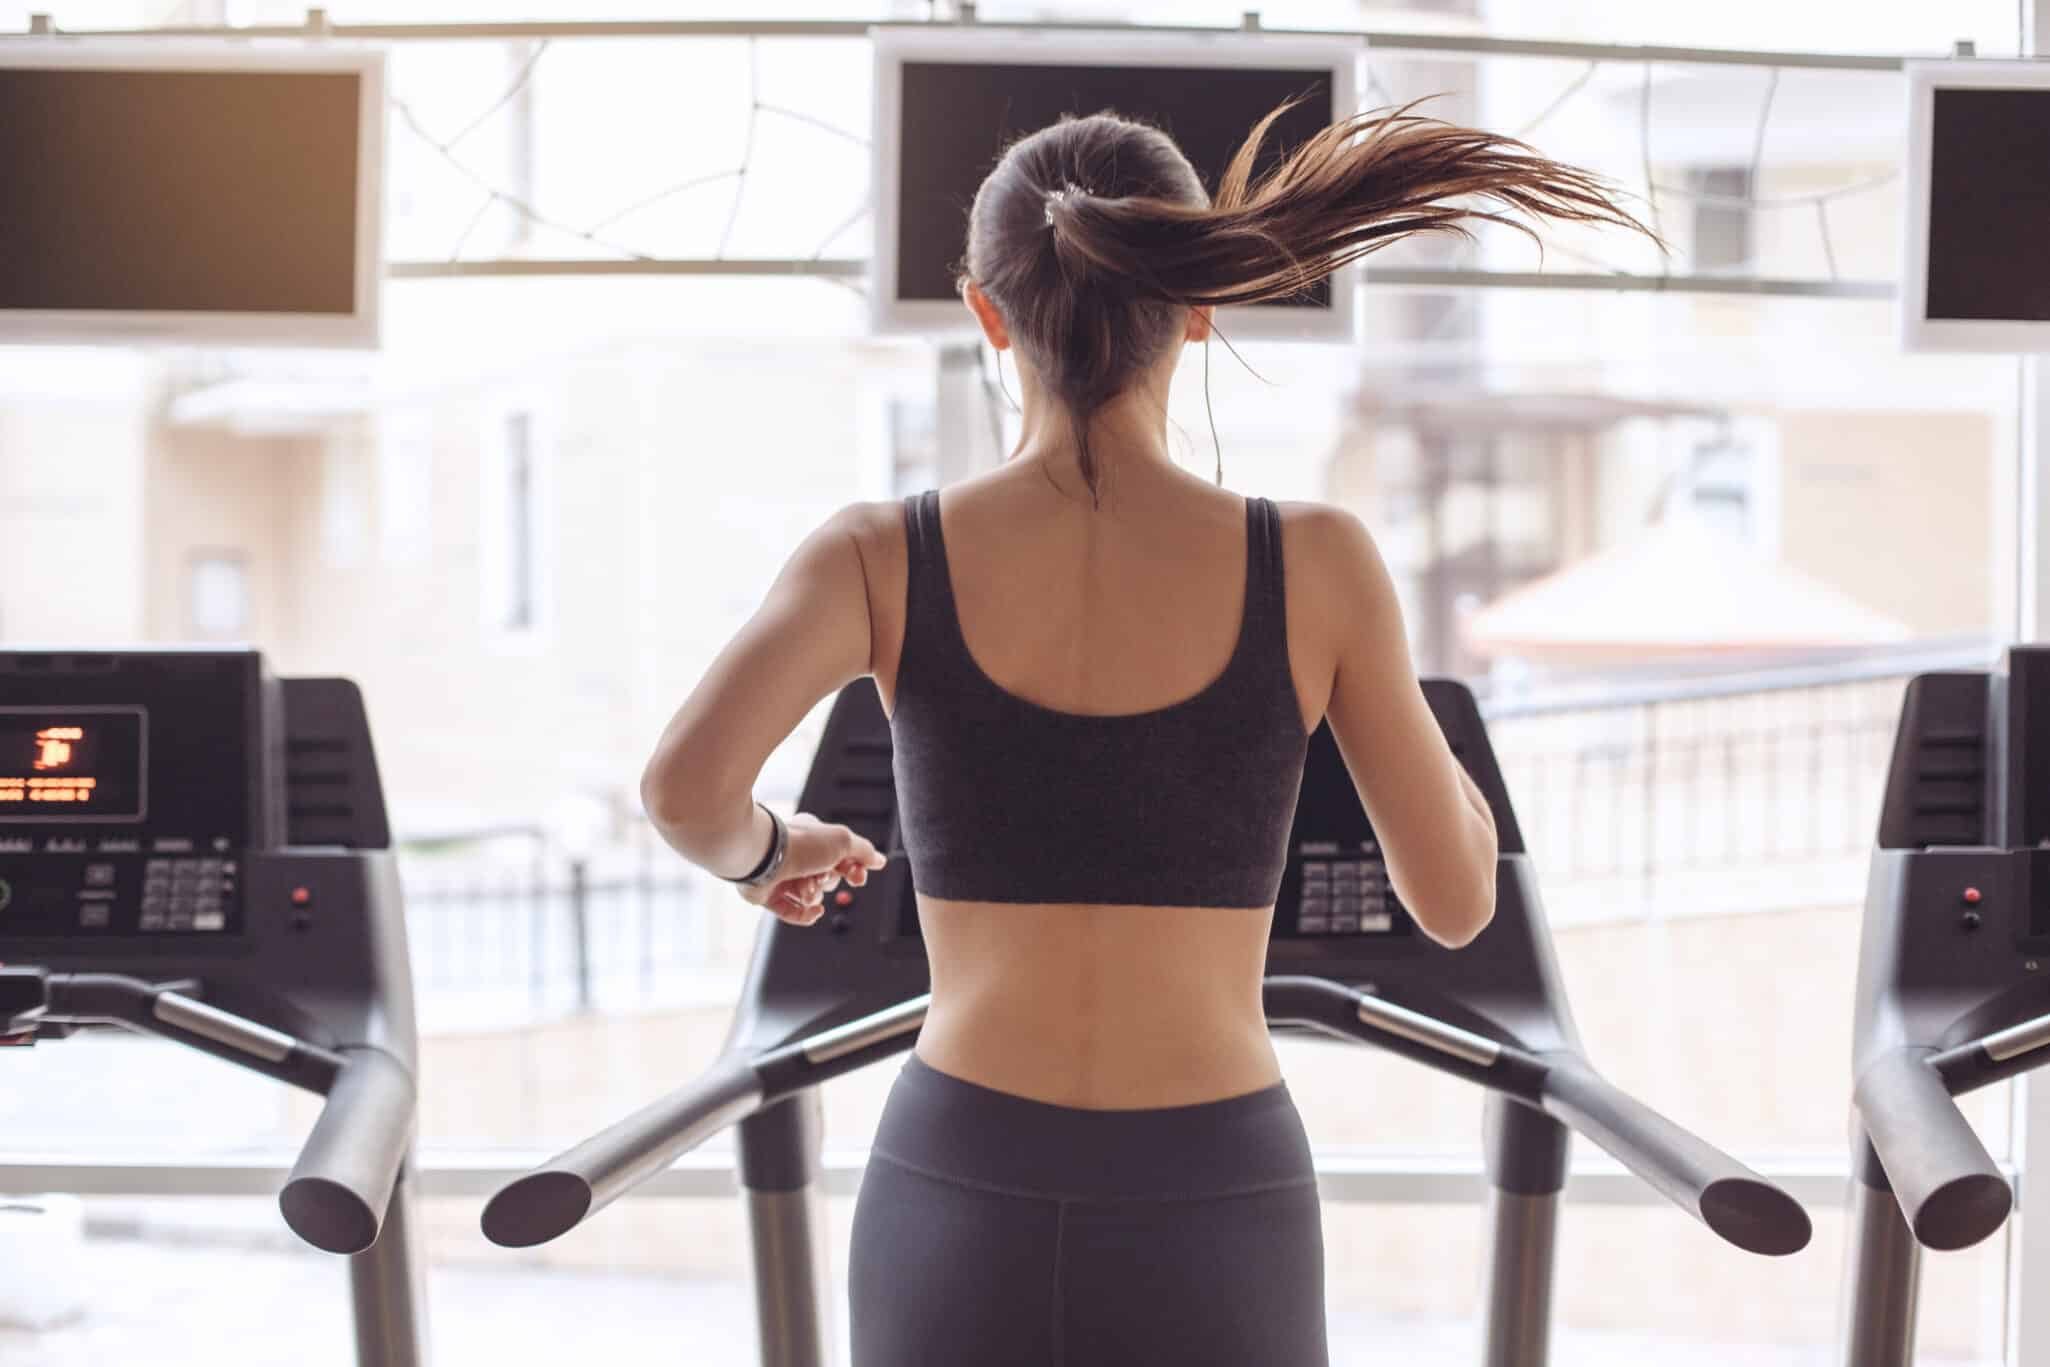 Back to active: Returning to exercise after breast augmentation